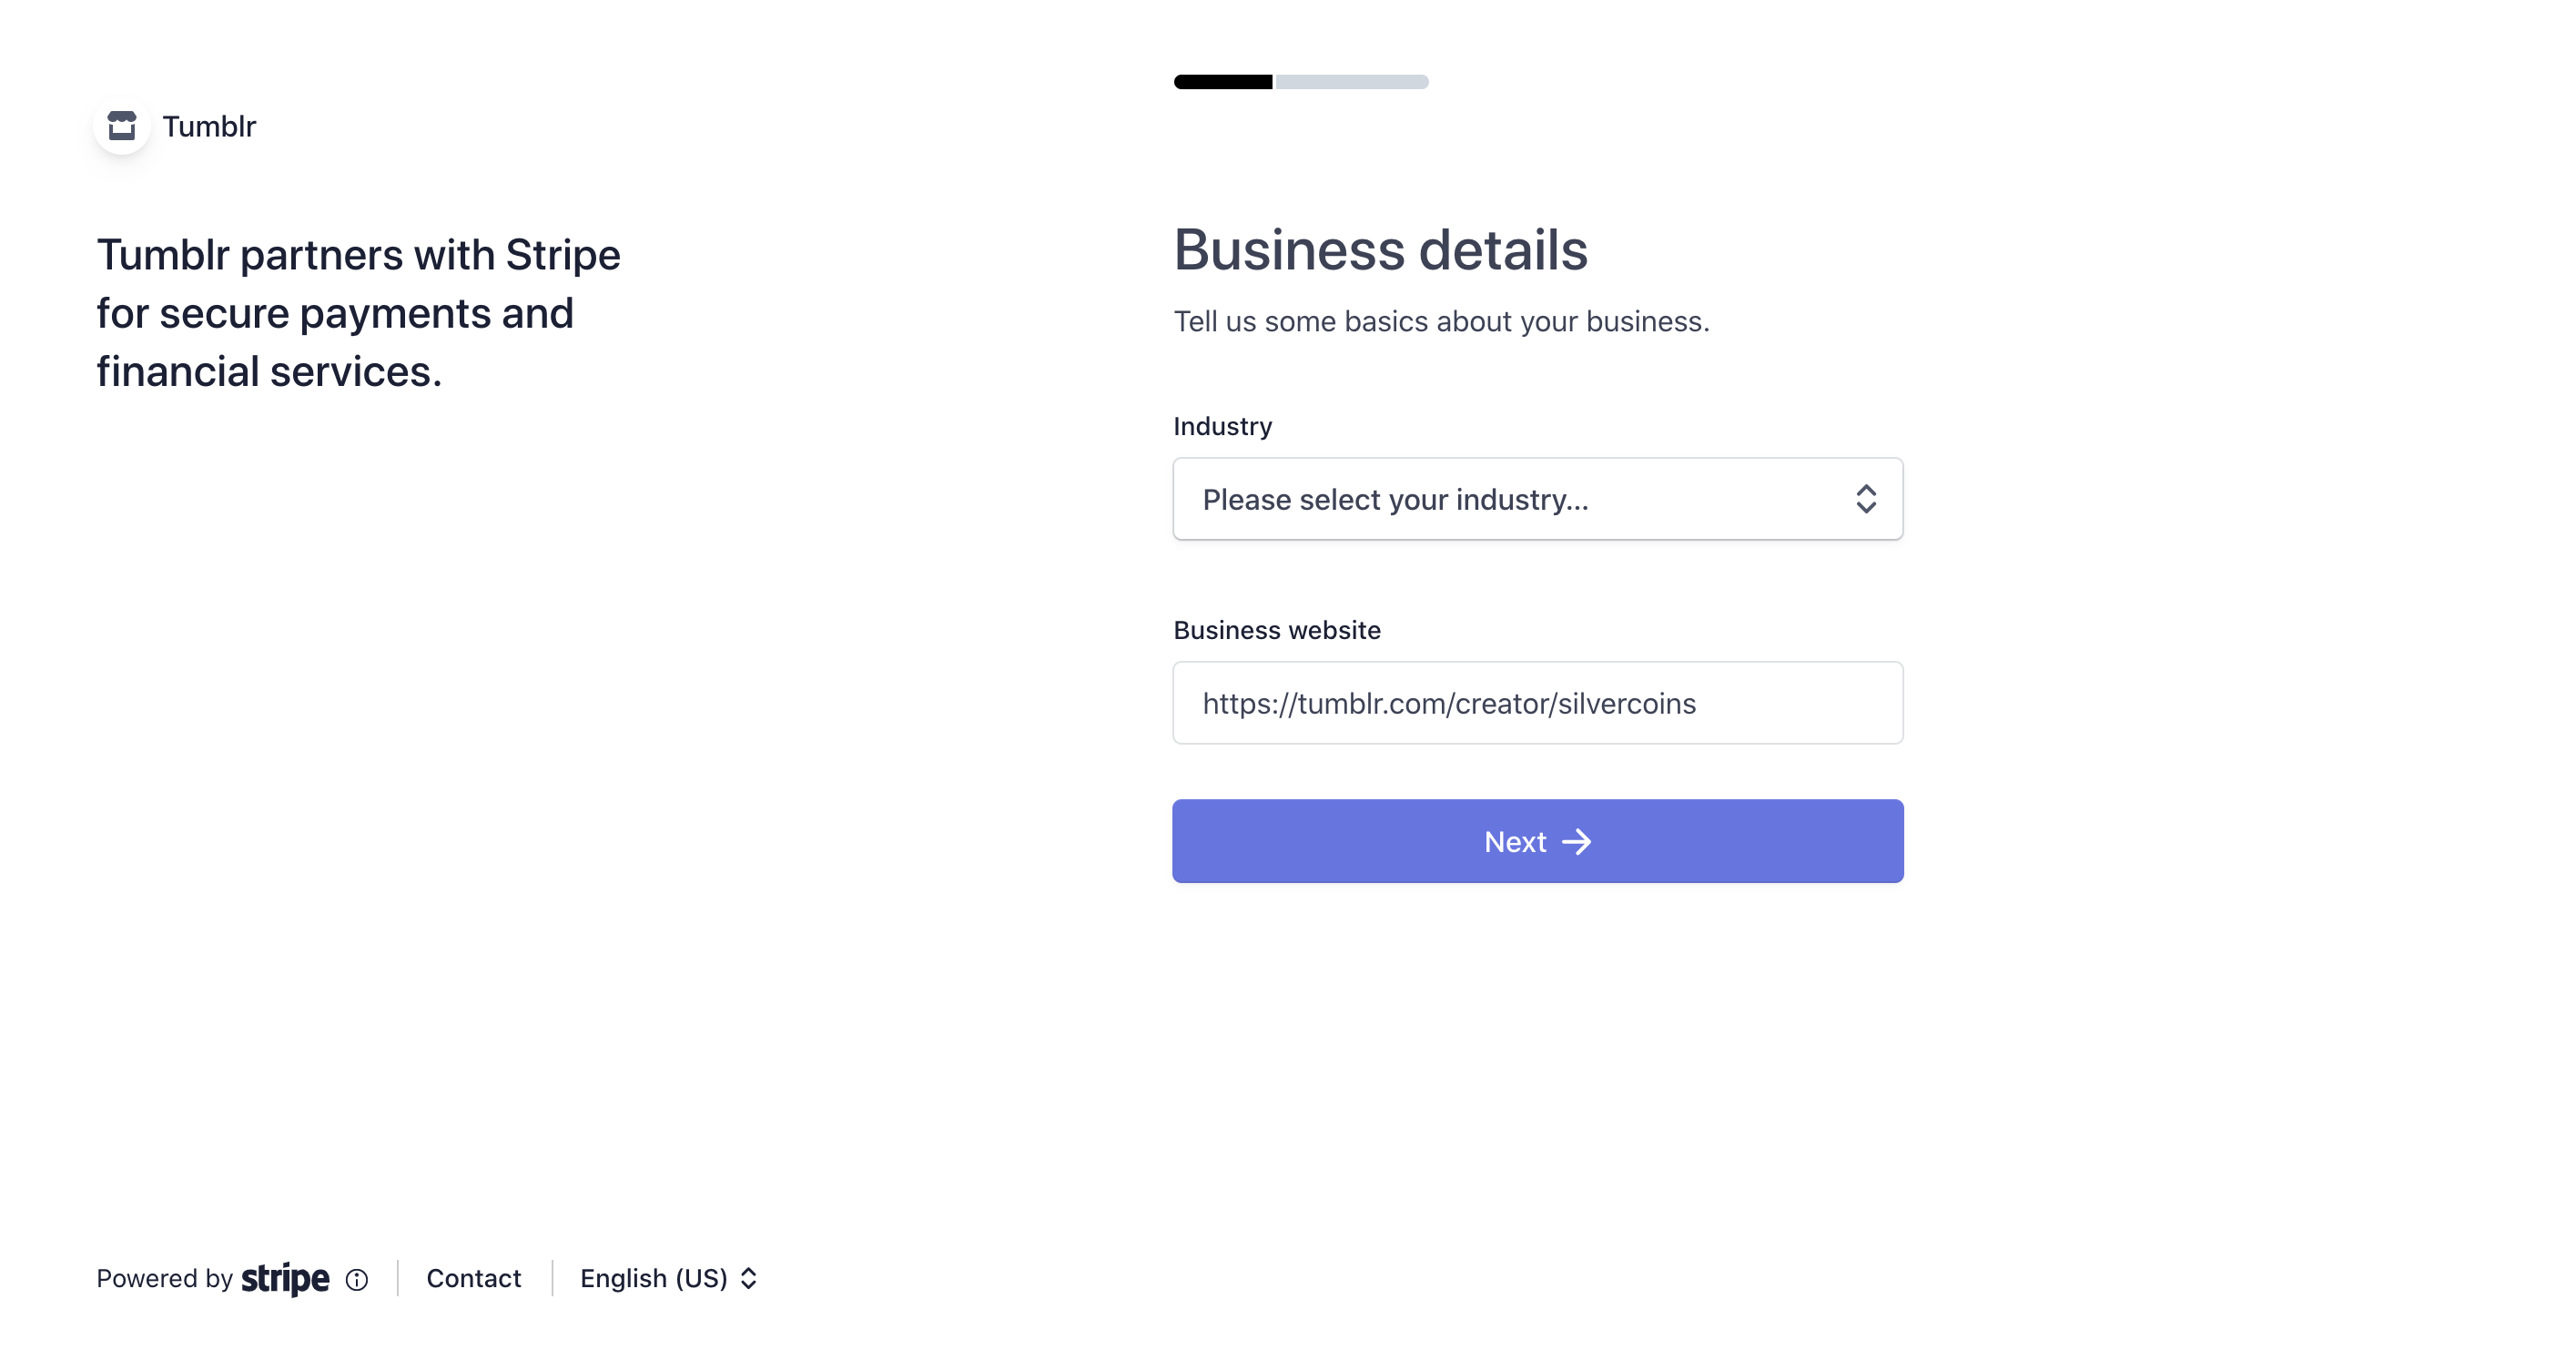 The Business details form. Stripe asks for your industry and your business website.